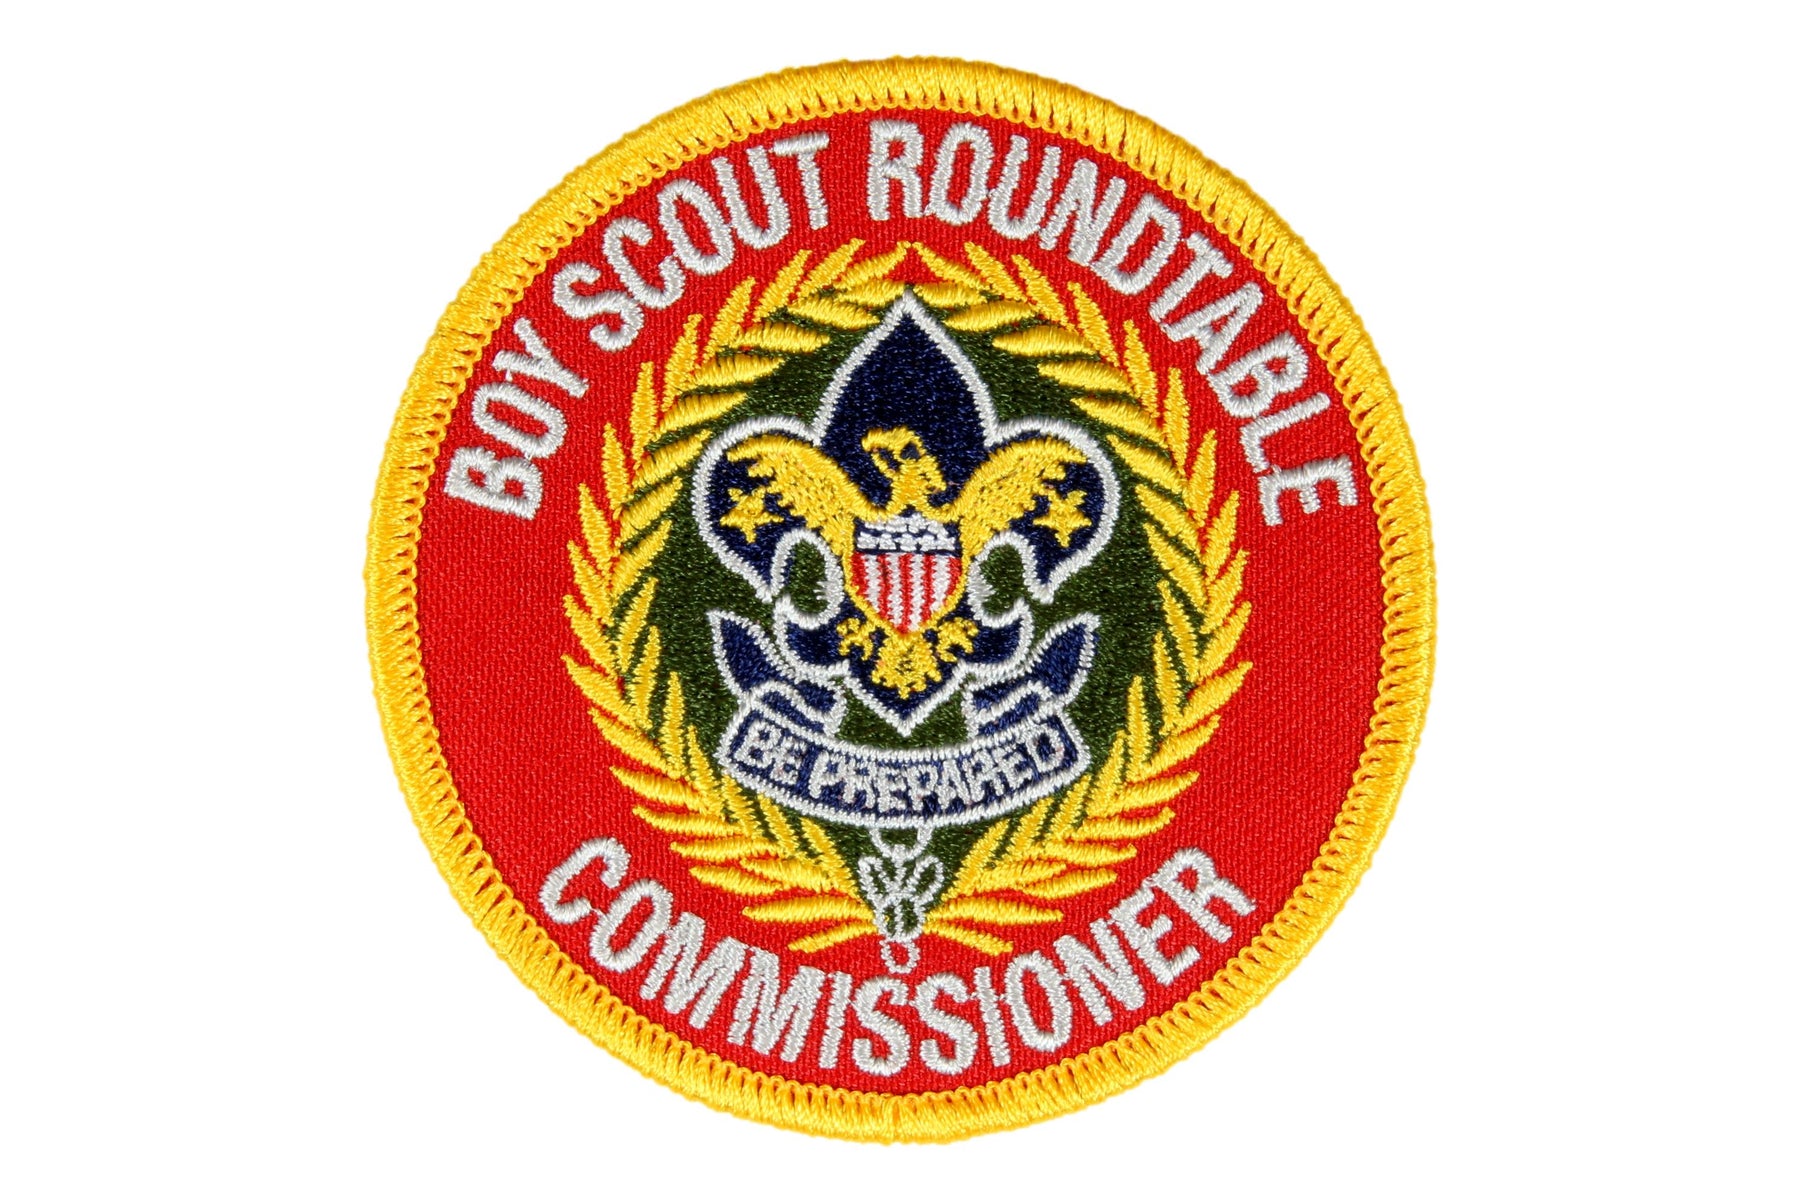 Boy Scout Roundtable Commissioner Patch - BSA Back